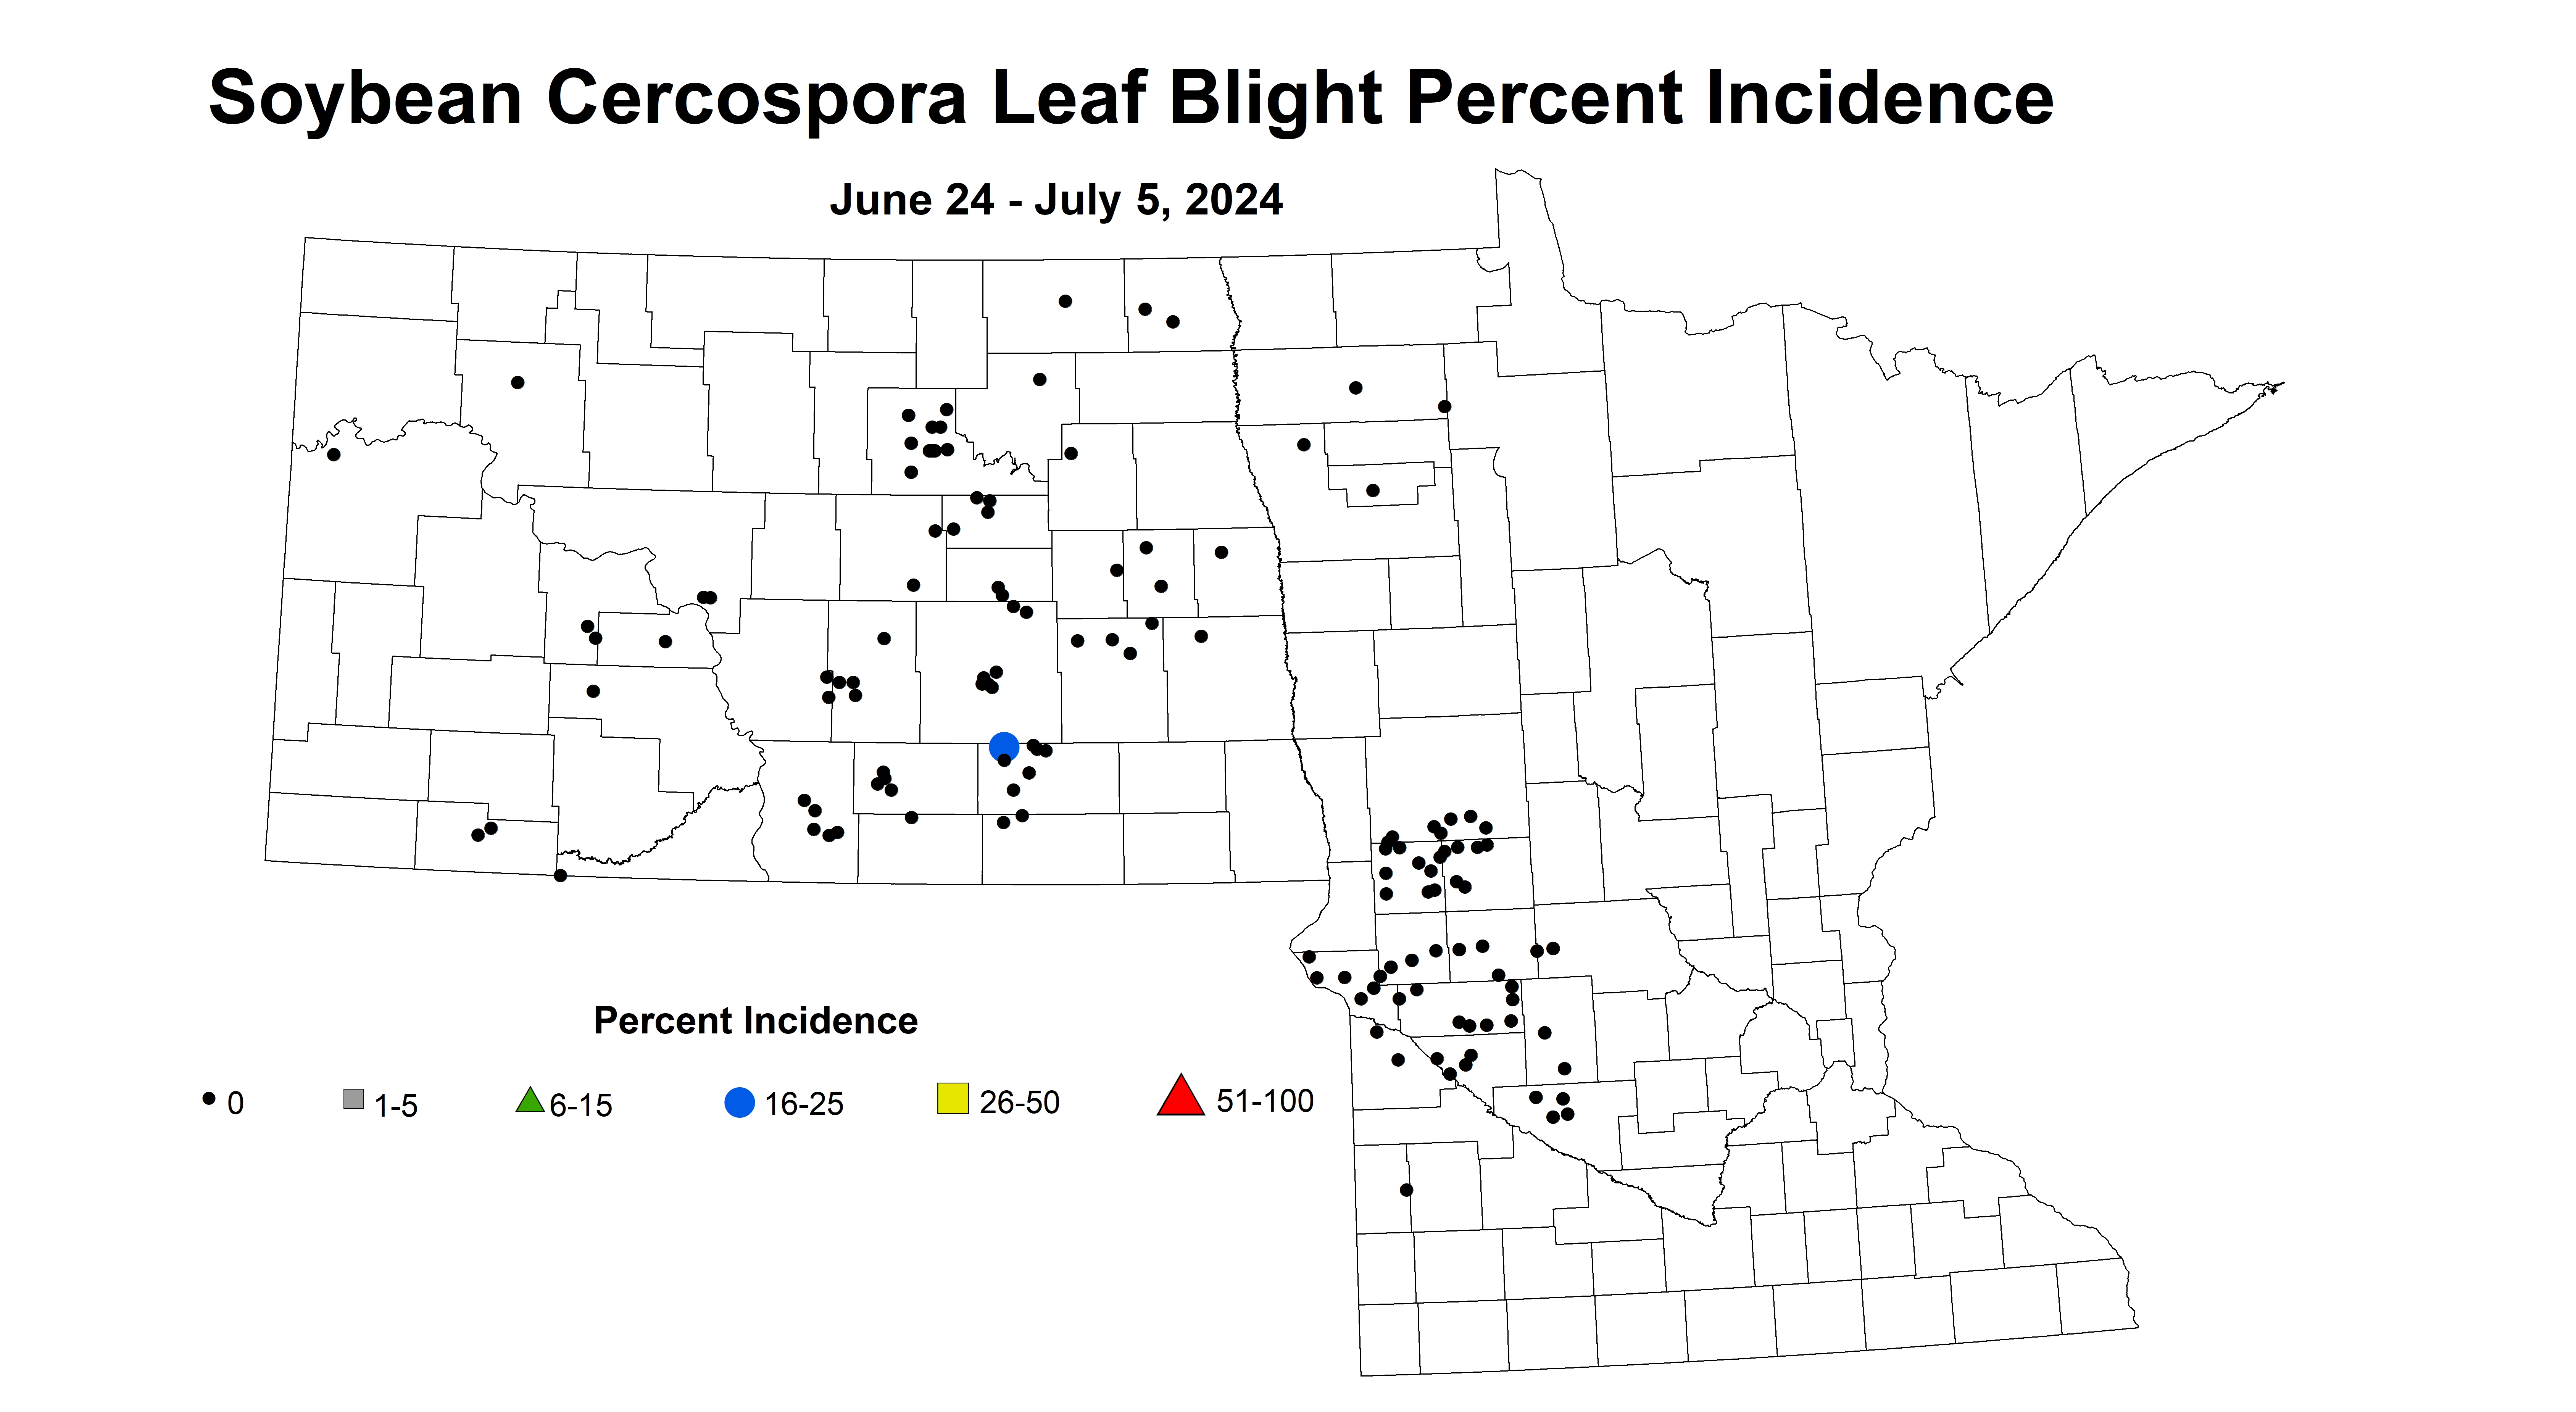 soybean cercospora leaf blight percent incidence June 24 to July 5 2024